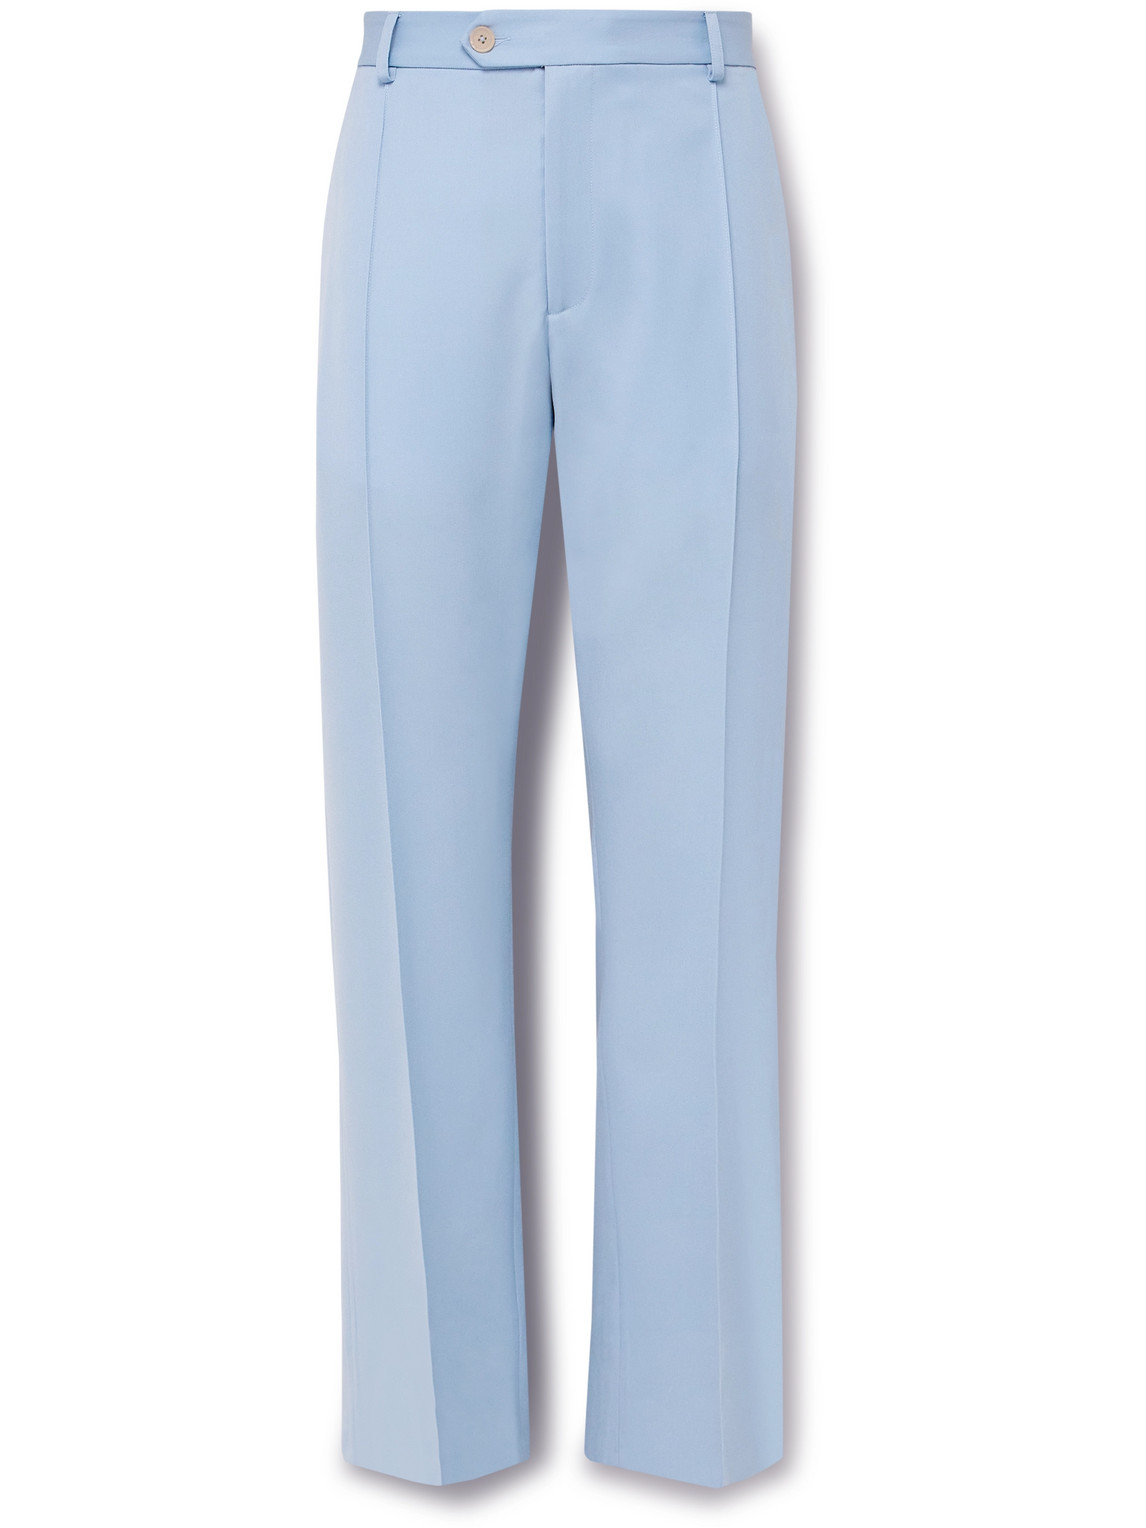 Small Talk Throwing Fits Straight-leg Pintucked Wool-gabardine Suit Trousers In Blue